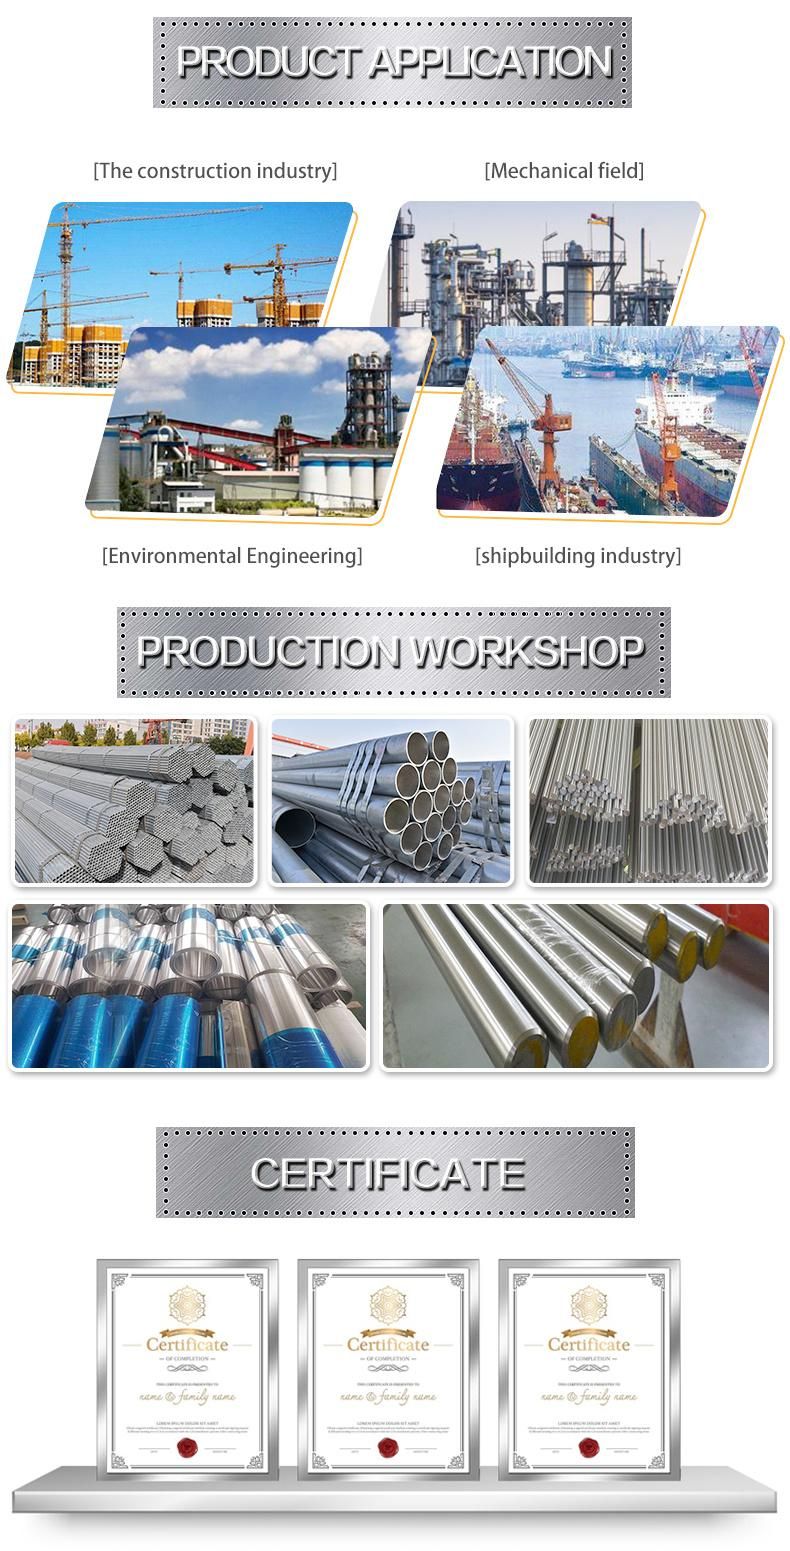 Hot Dipped Galvanized Greenhouse Frame Welded Carbon Steel Pipe / Seamless Carbon Steel Pipe